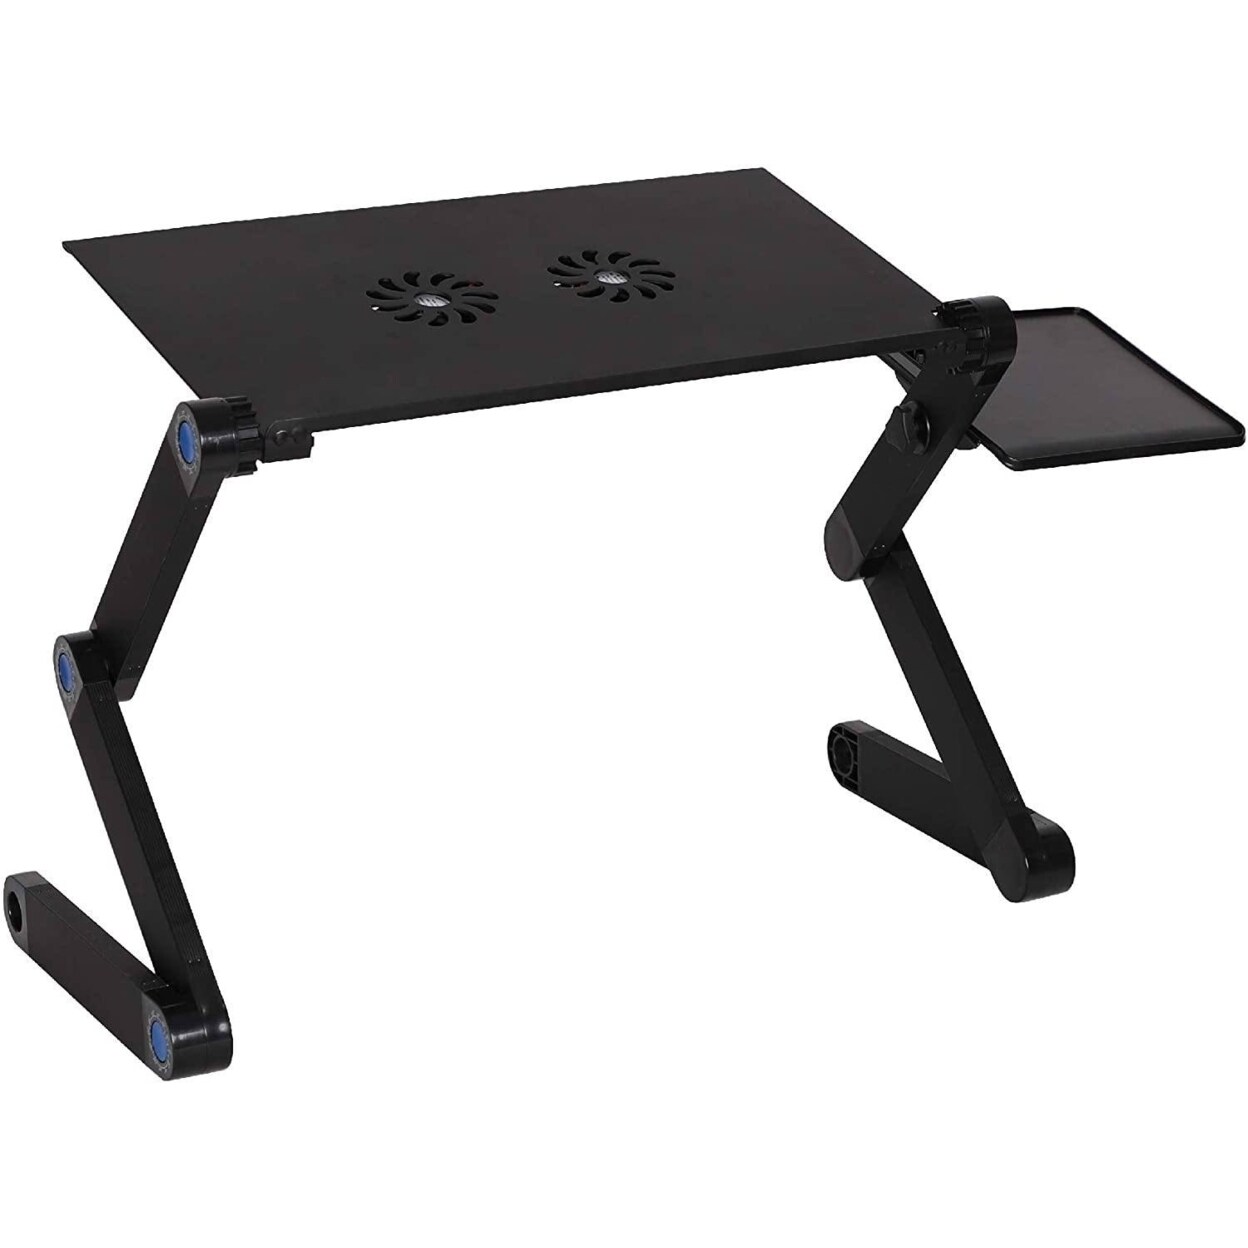 SKUSHOPS Foldable Aluminum Laptop Desk Adjustable Portable Table Stand with 2 CPU Cooling Fans and Mouse Pad